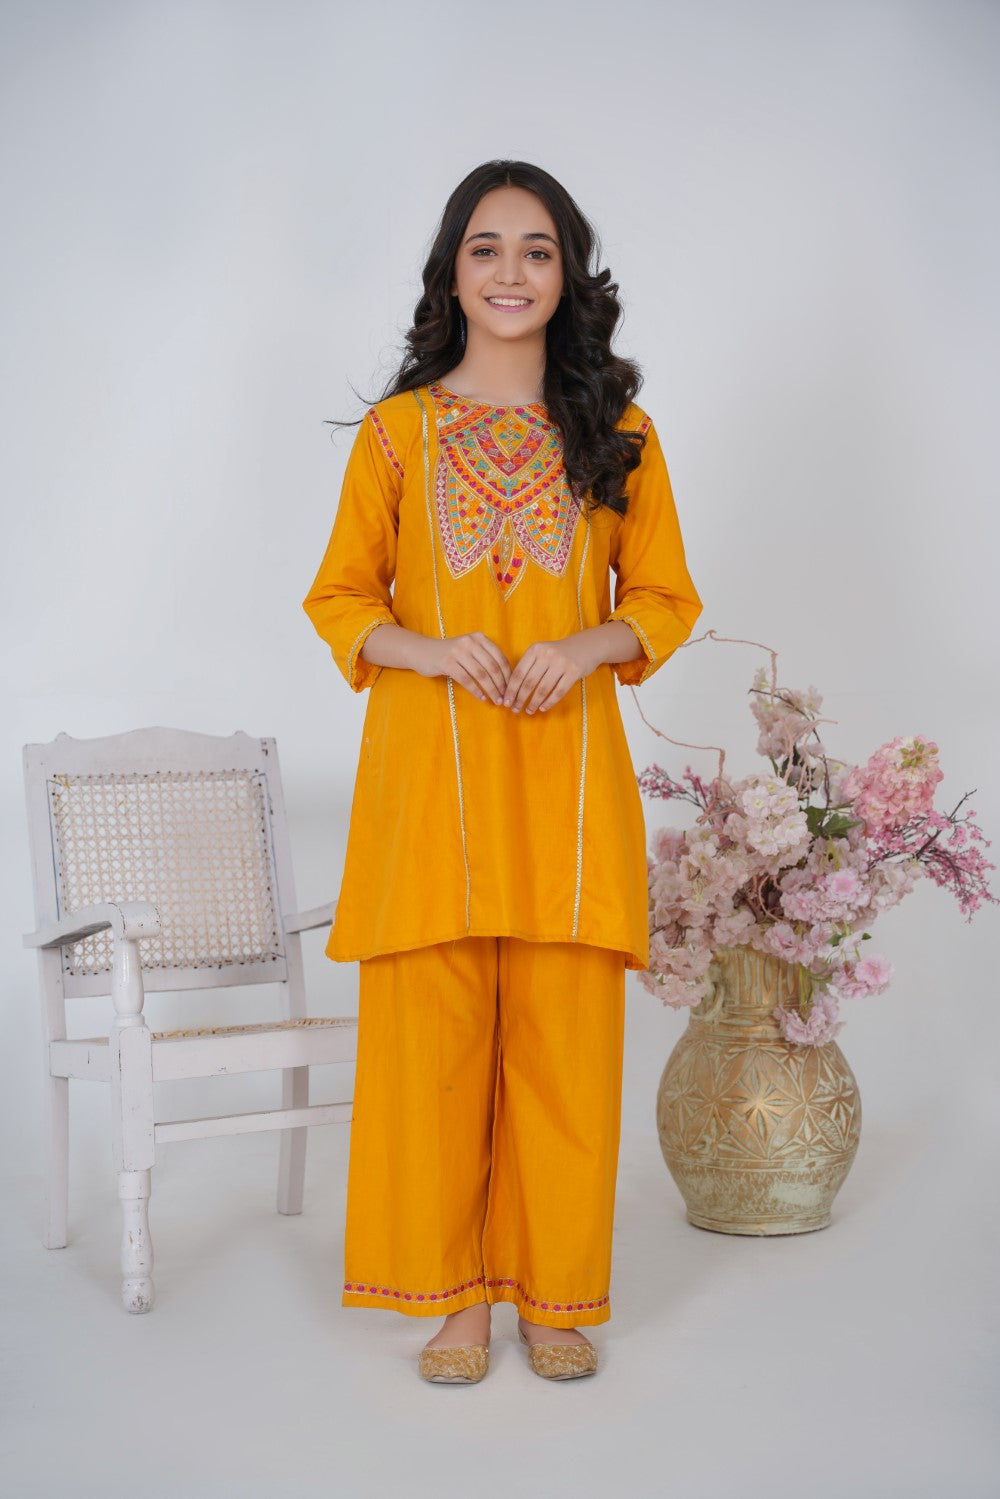 2Pc Yellow Embroidered Girl'S Suit